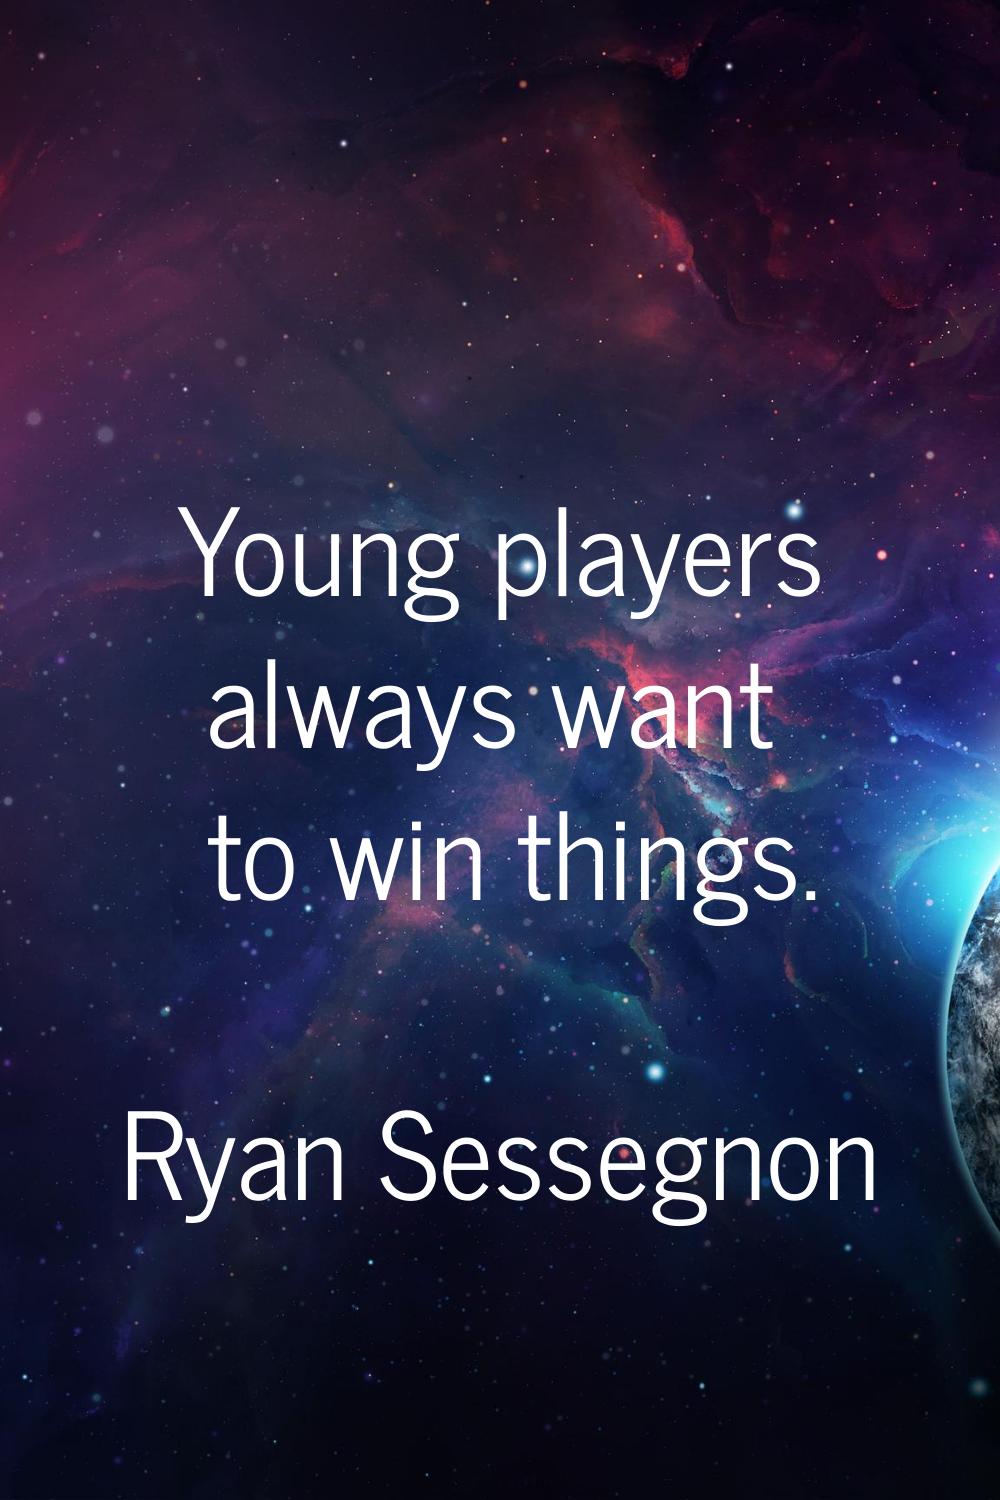 Young players always want to win things.